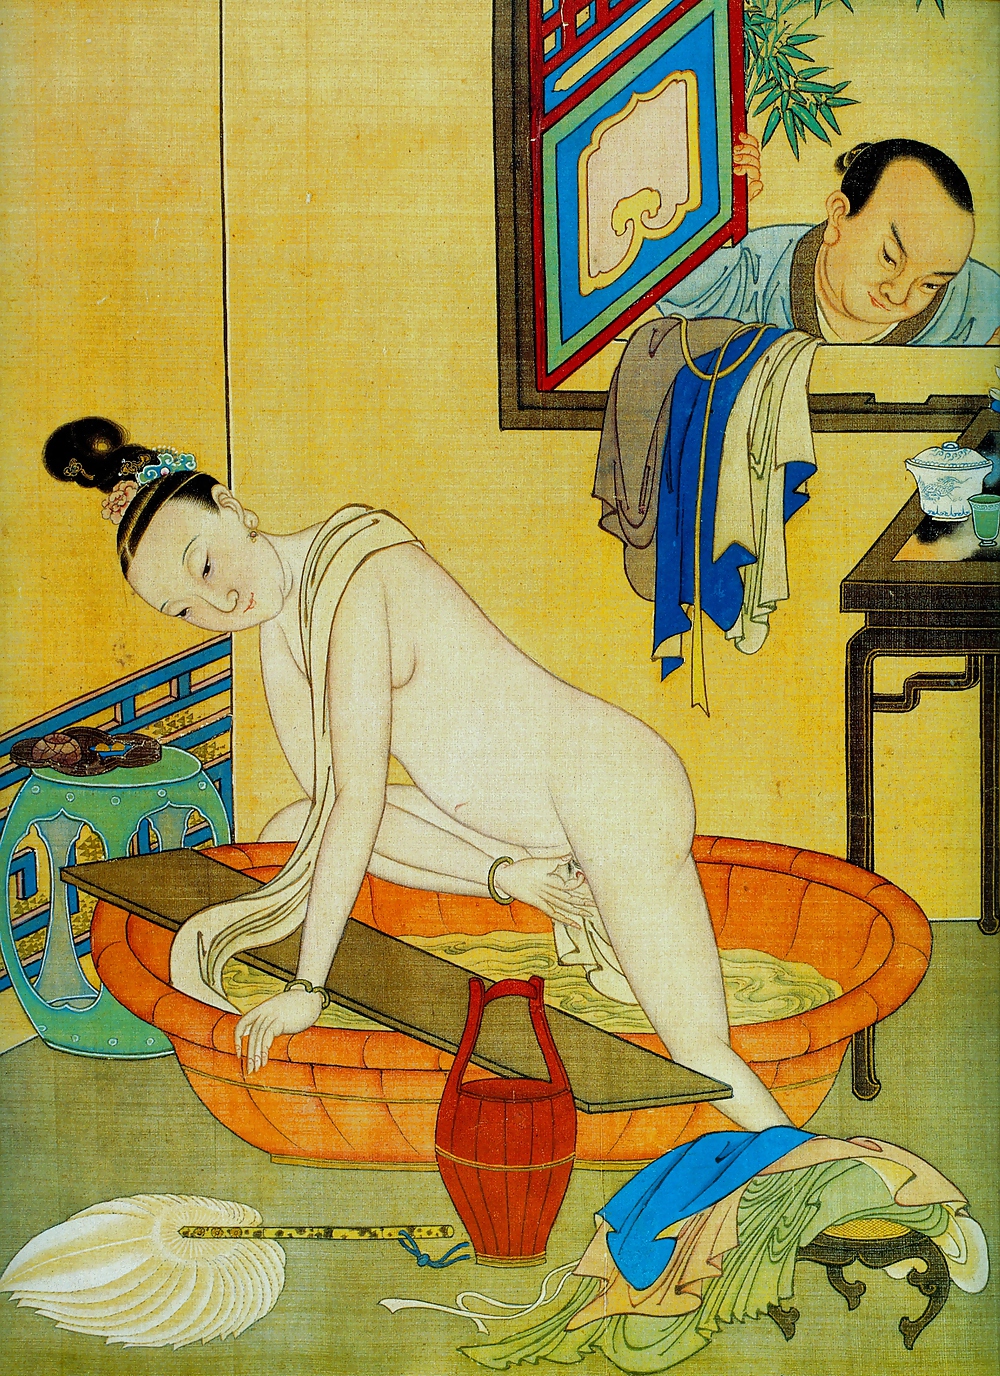 Drawn Ero and Porn Art 2 - Chinese Miniature Emperial Period #5517013